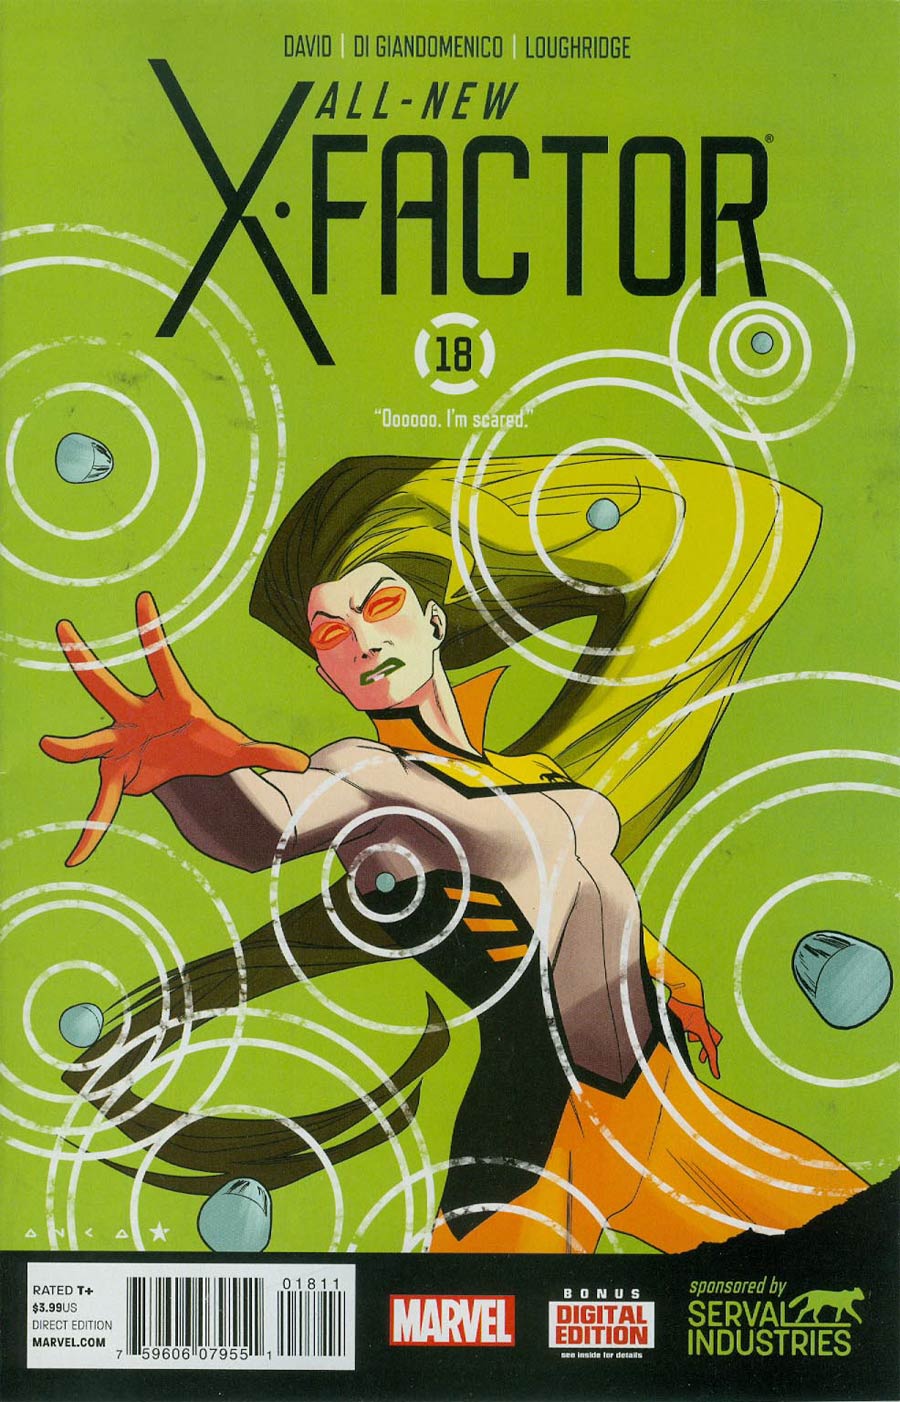 All-New X-Factor #18 (AXIS Tie-In)